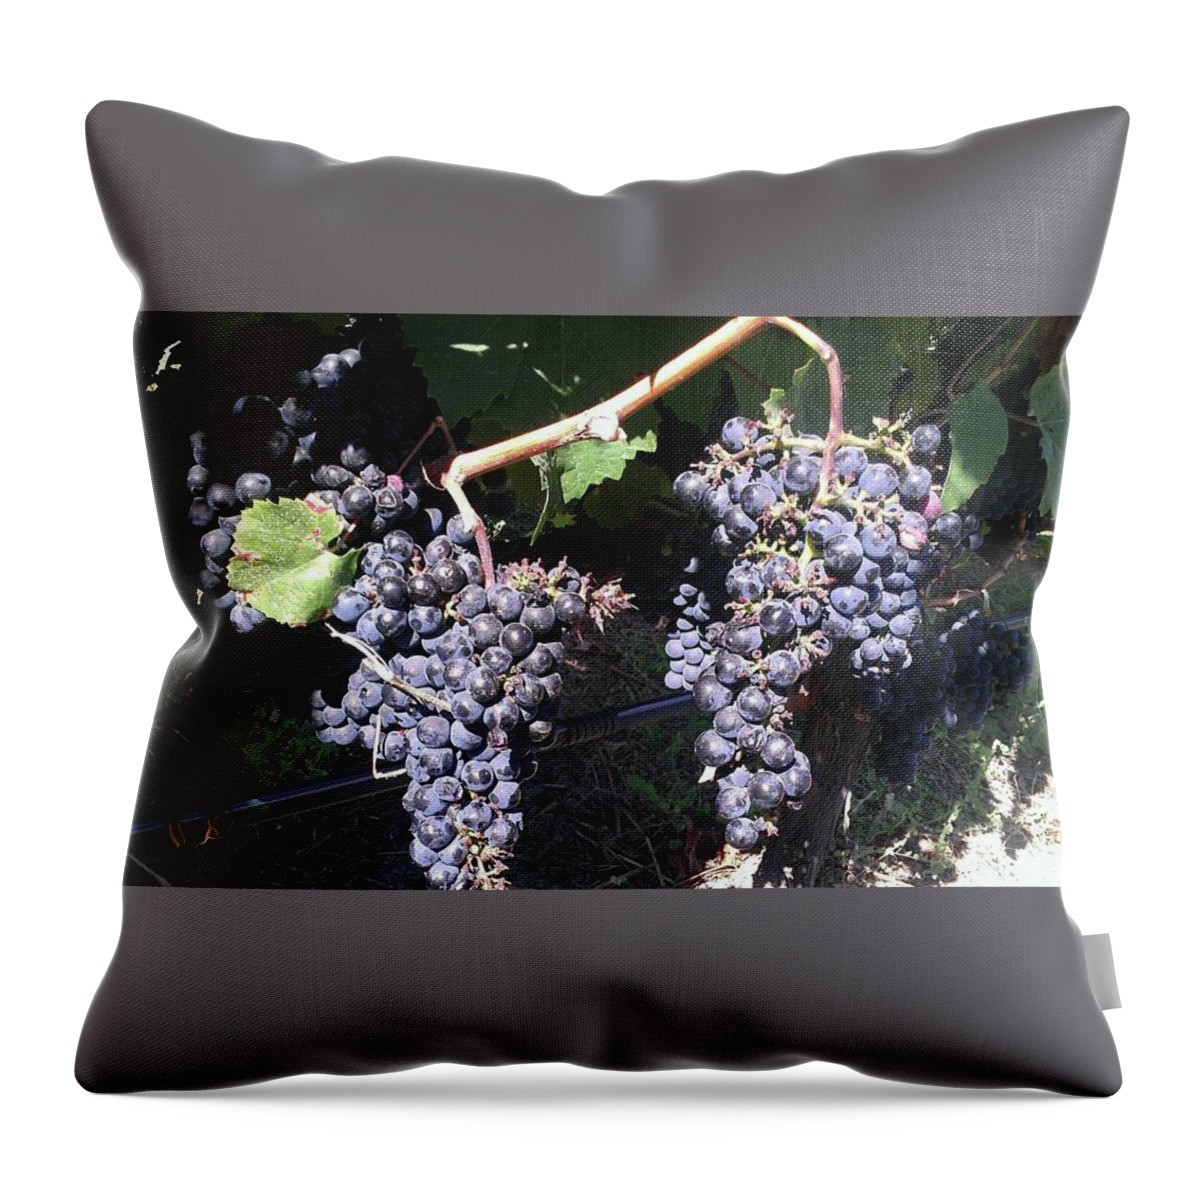 Grapes Throw Pillow featuring the photograph Grapes by Michelle Stevens